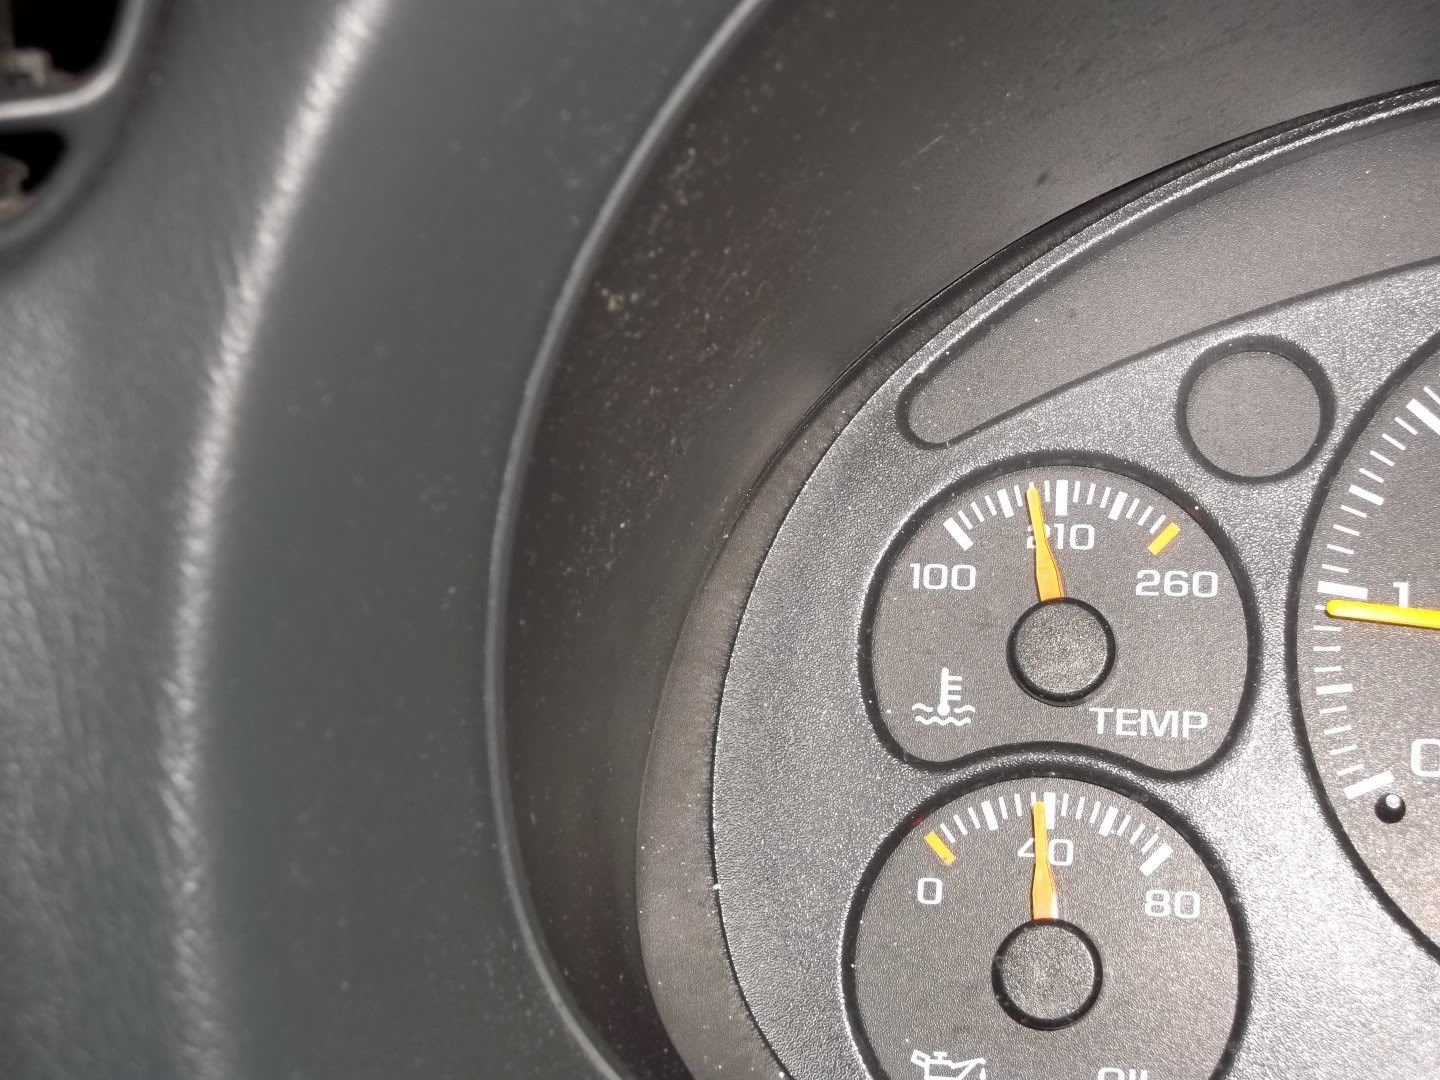 Temp gauge goes up and down honda #1